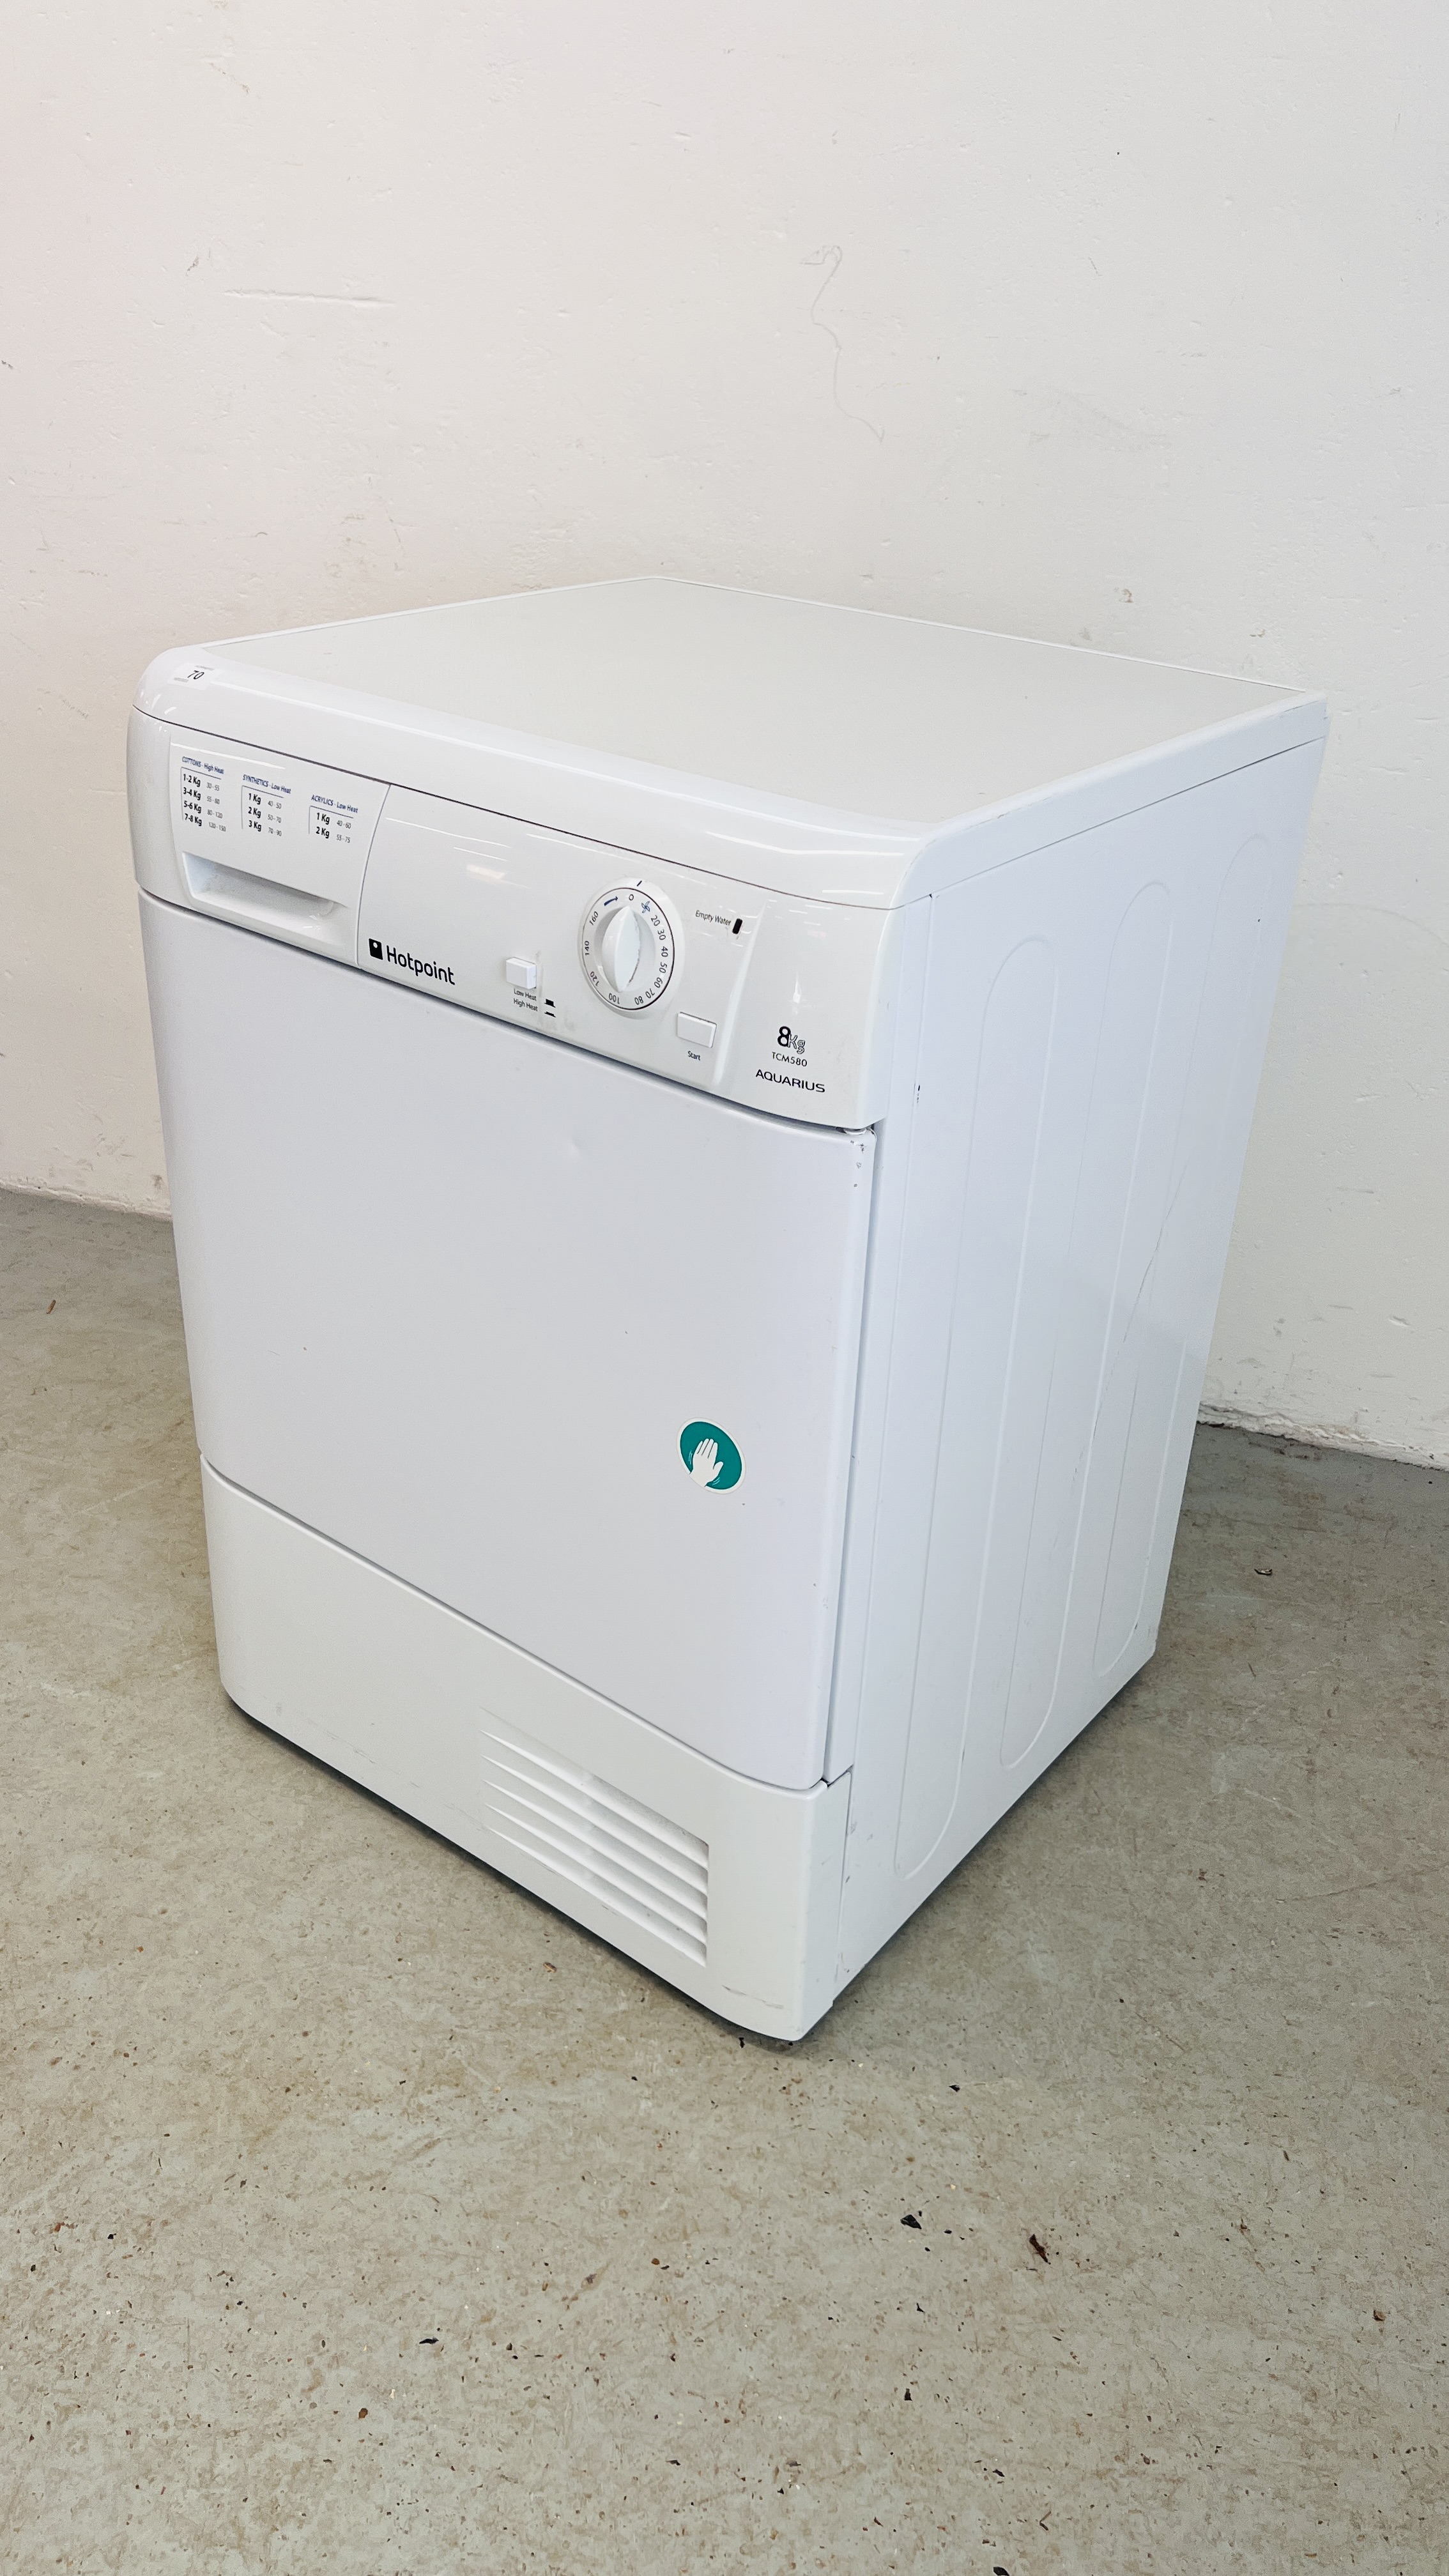 HOTPOINT 8KG TCM580 AQUARIUS CONDENSER TUMBLE DRYER - SOLD AS SEEN. - Image 4 of 6